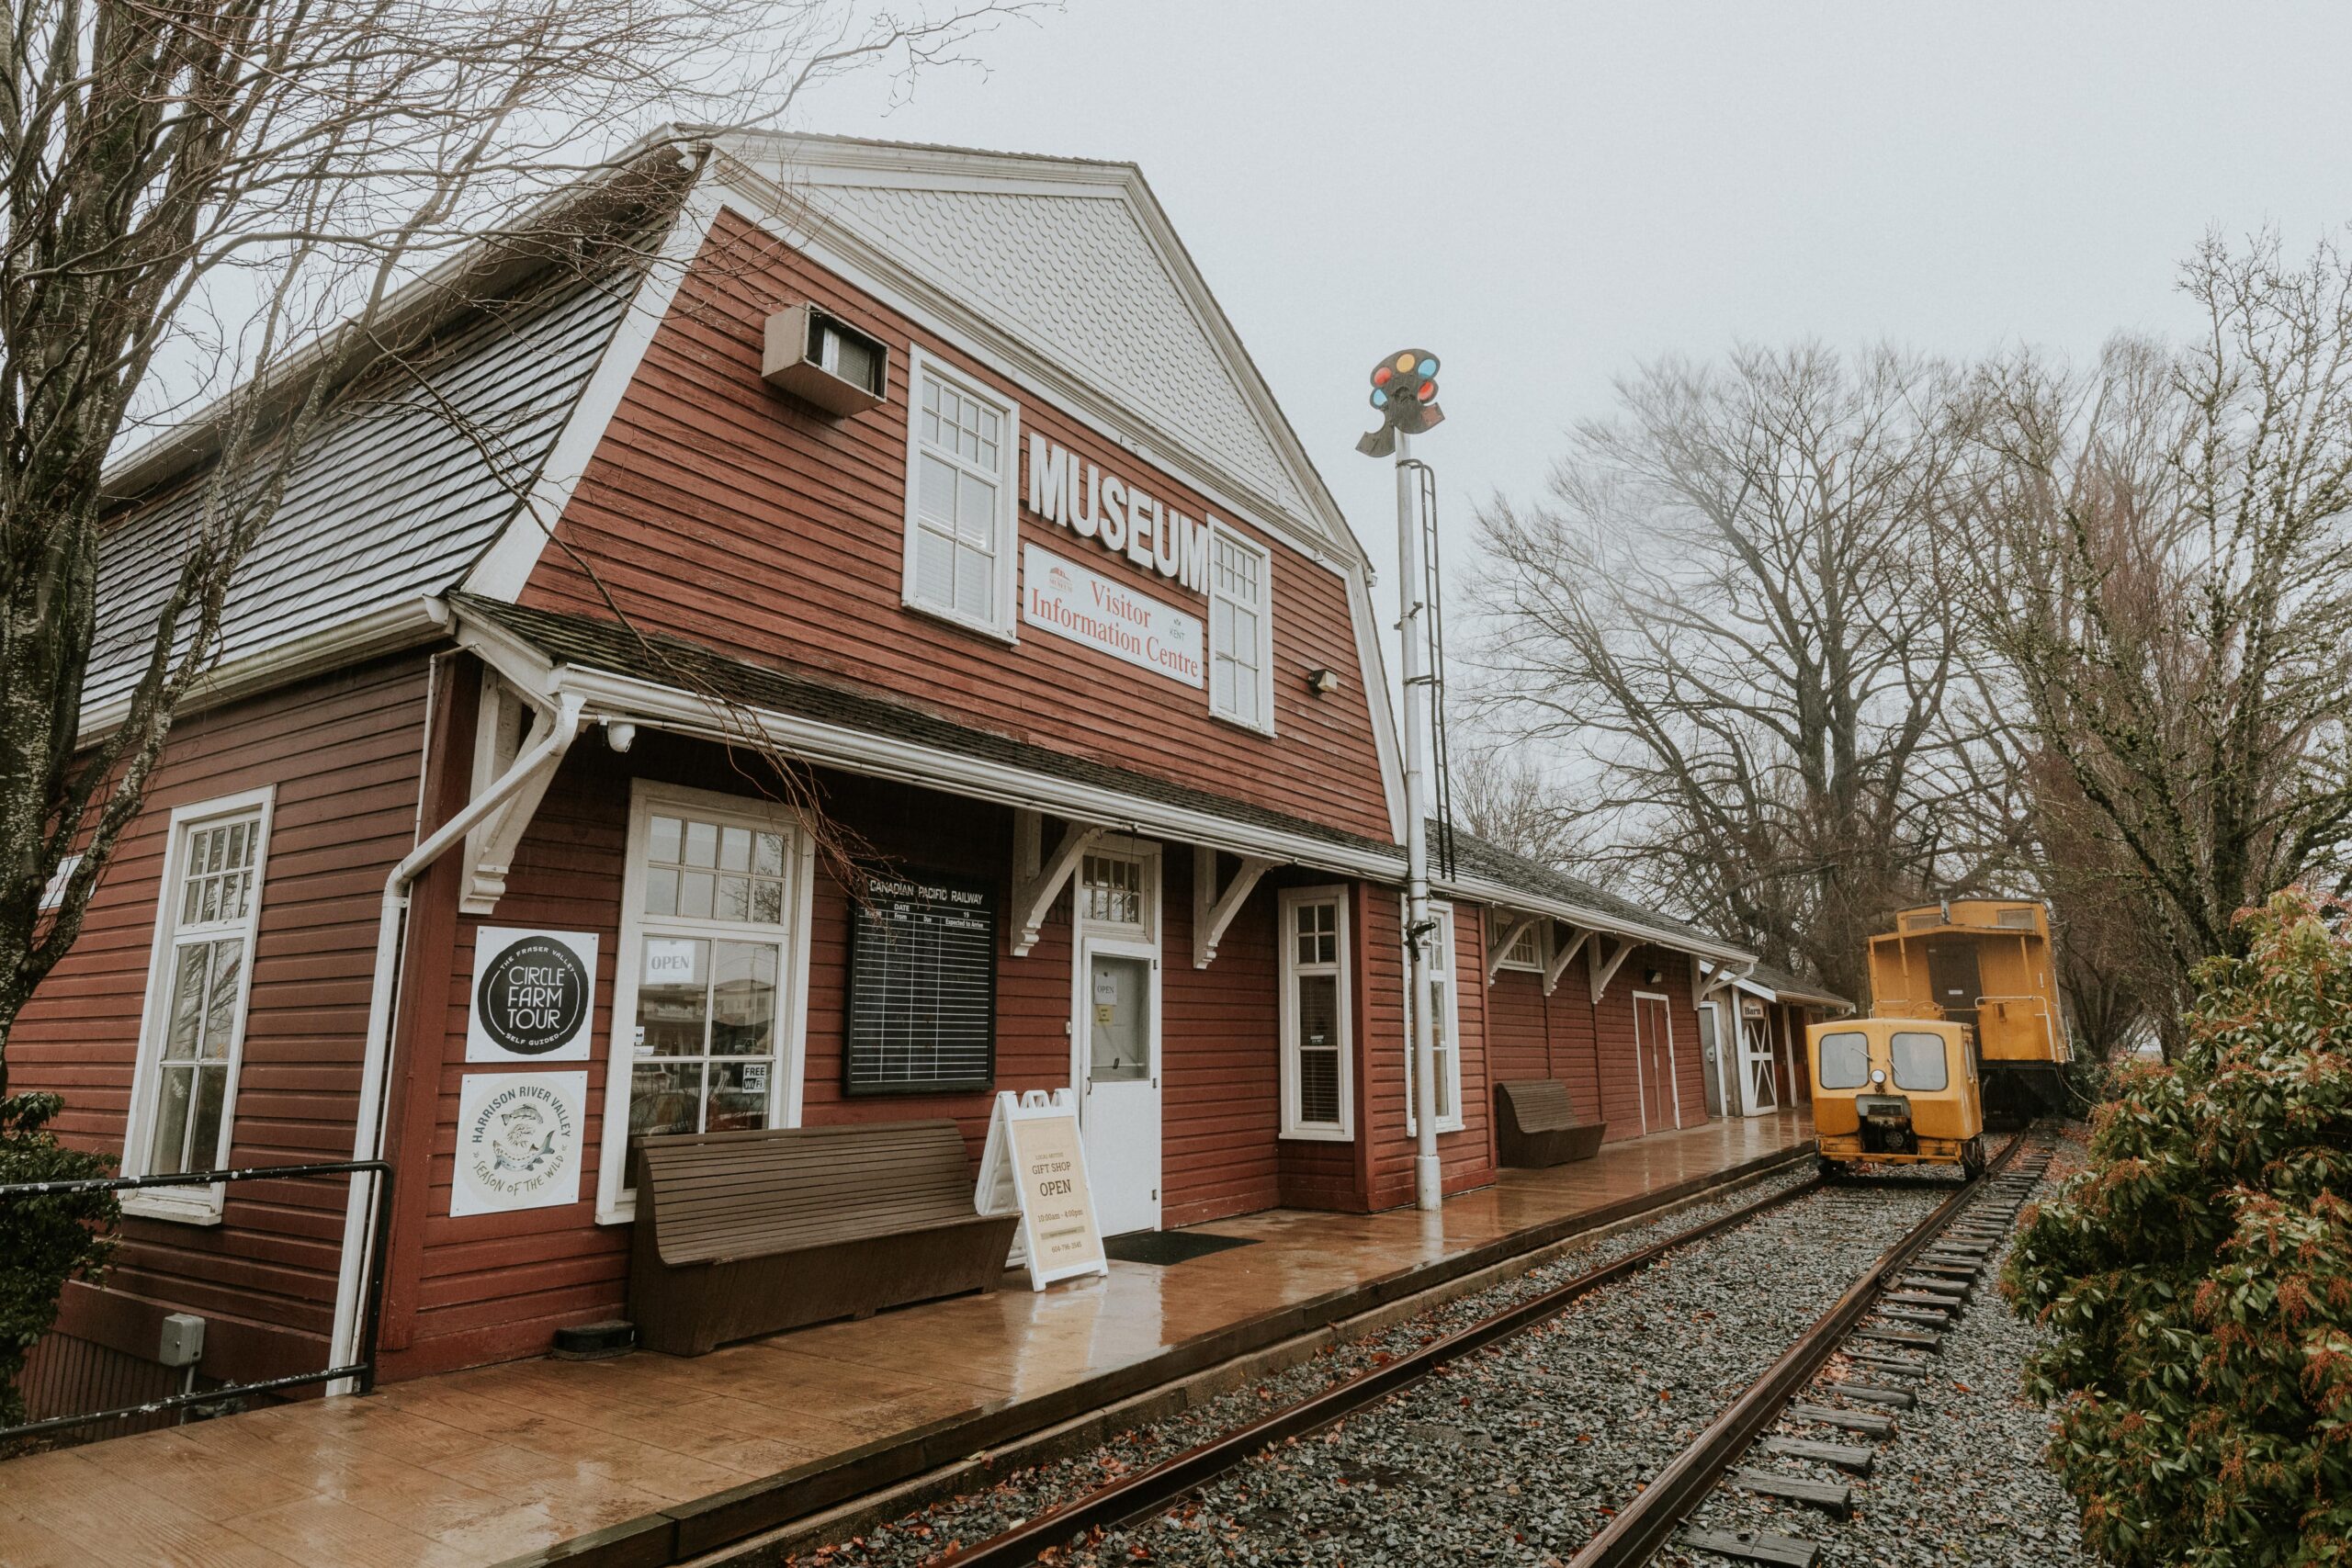 An operational train moving along the tracks, in front of a red barn-looking museum